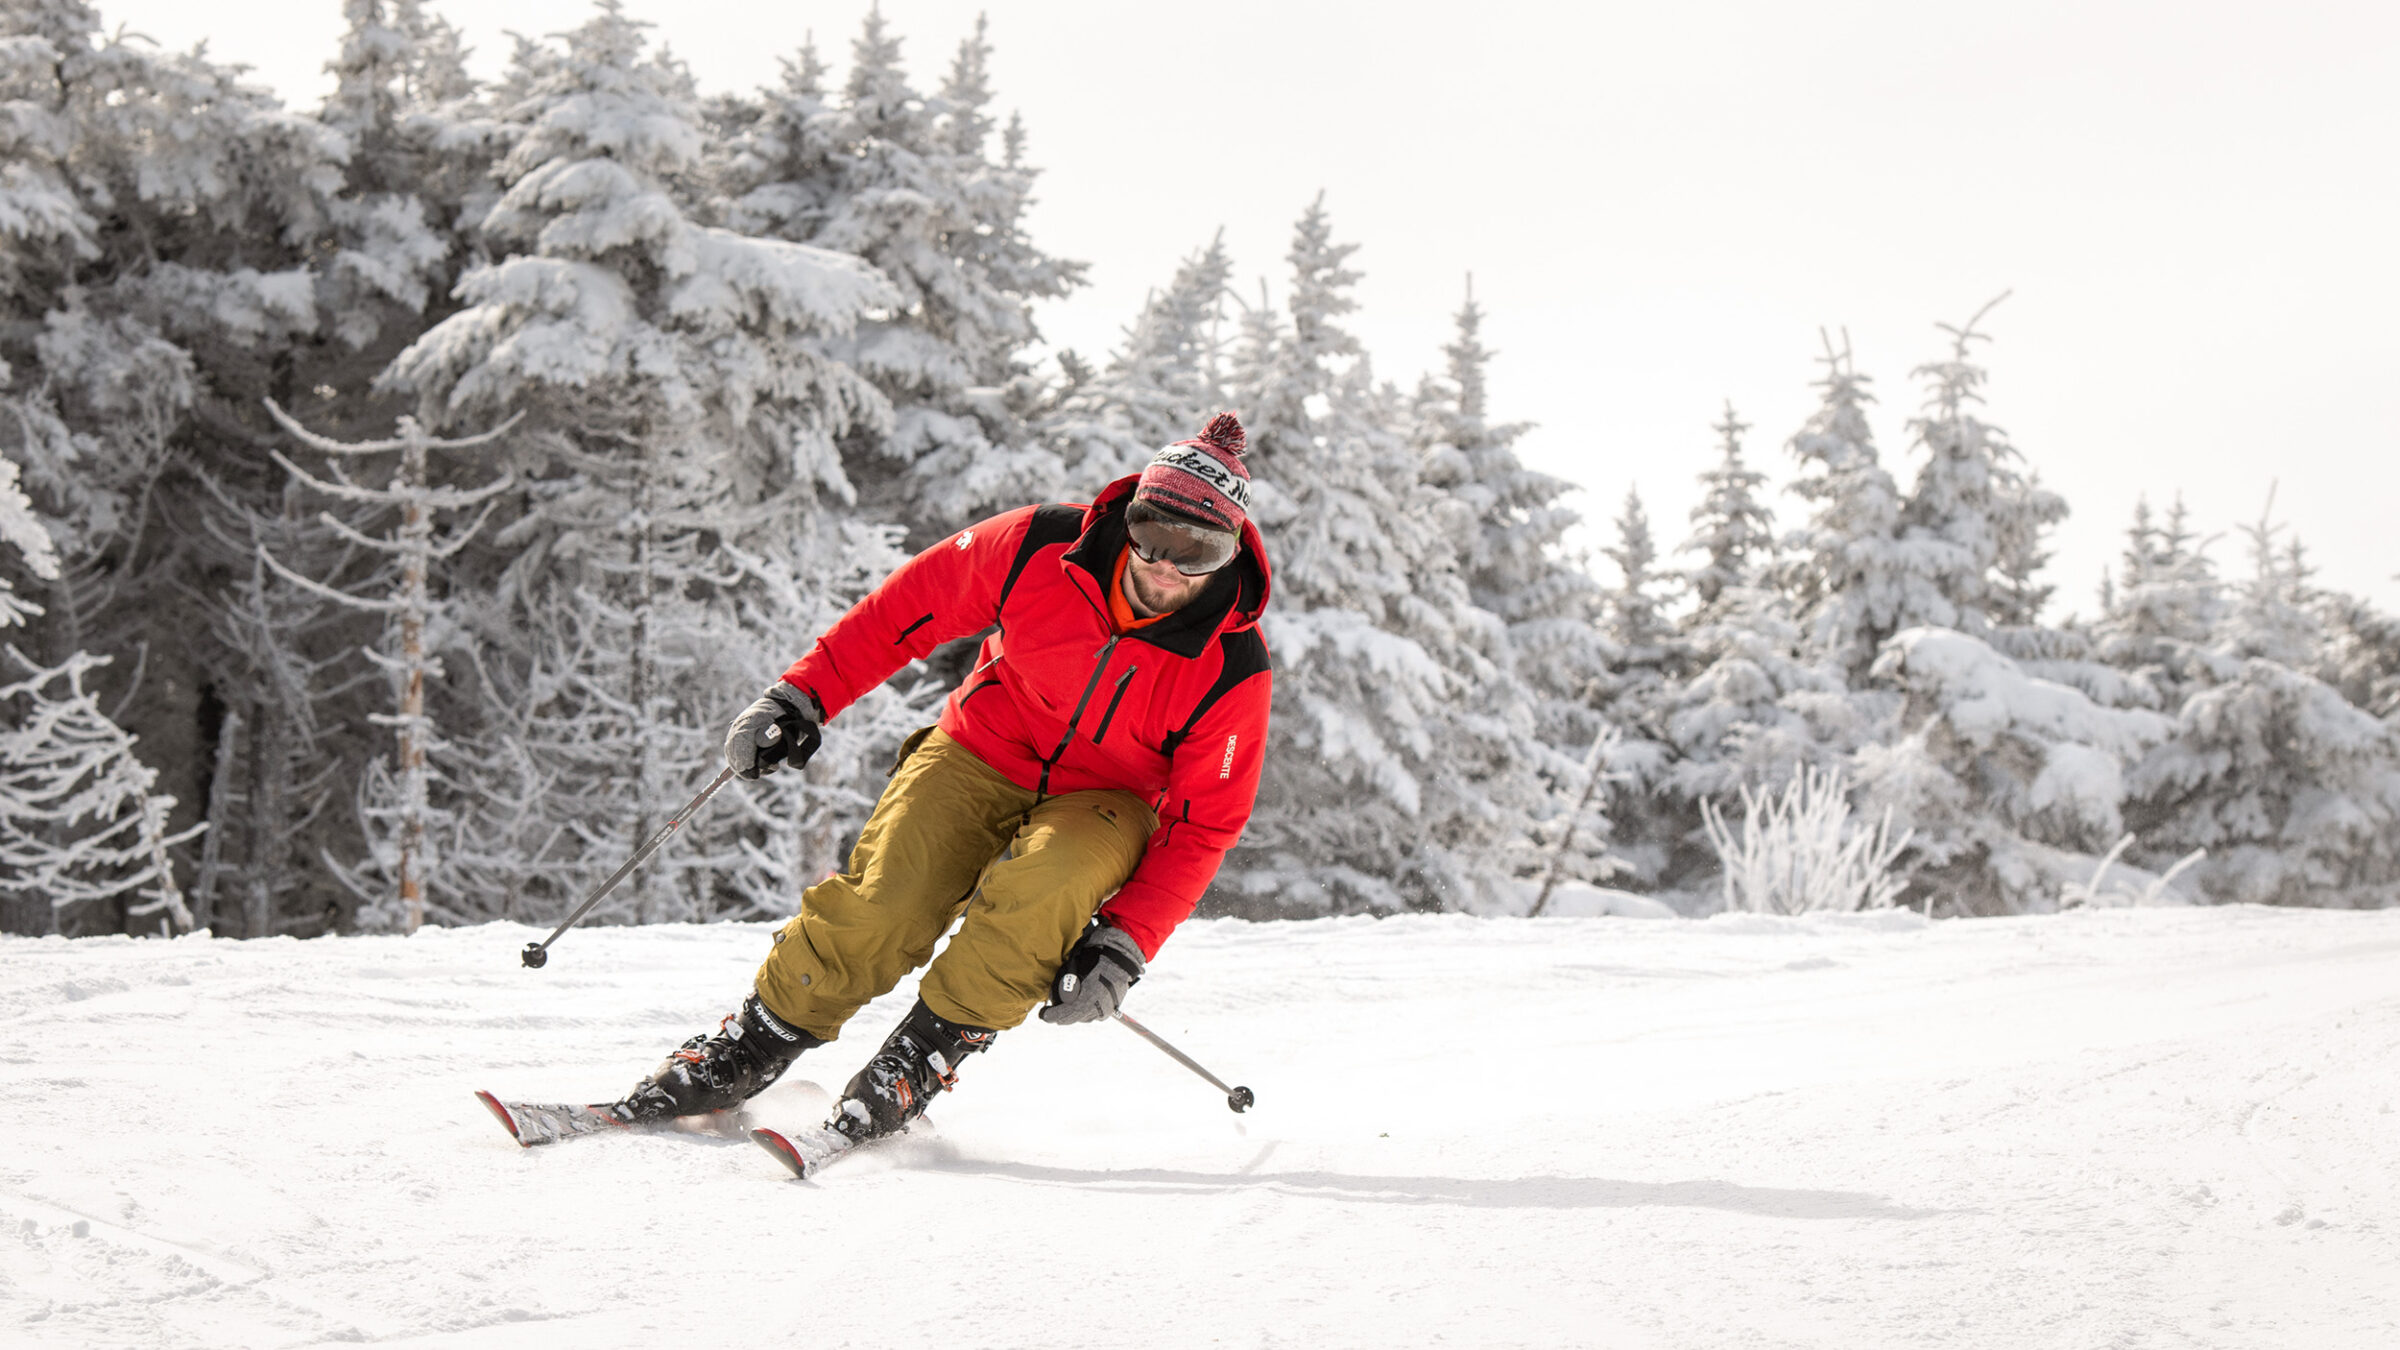 skier in bright clothing surrounded by white snow